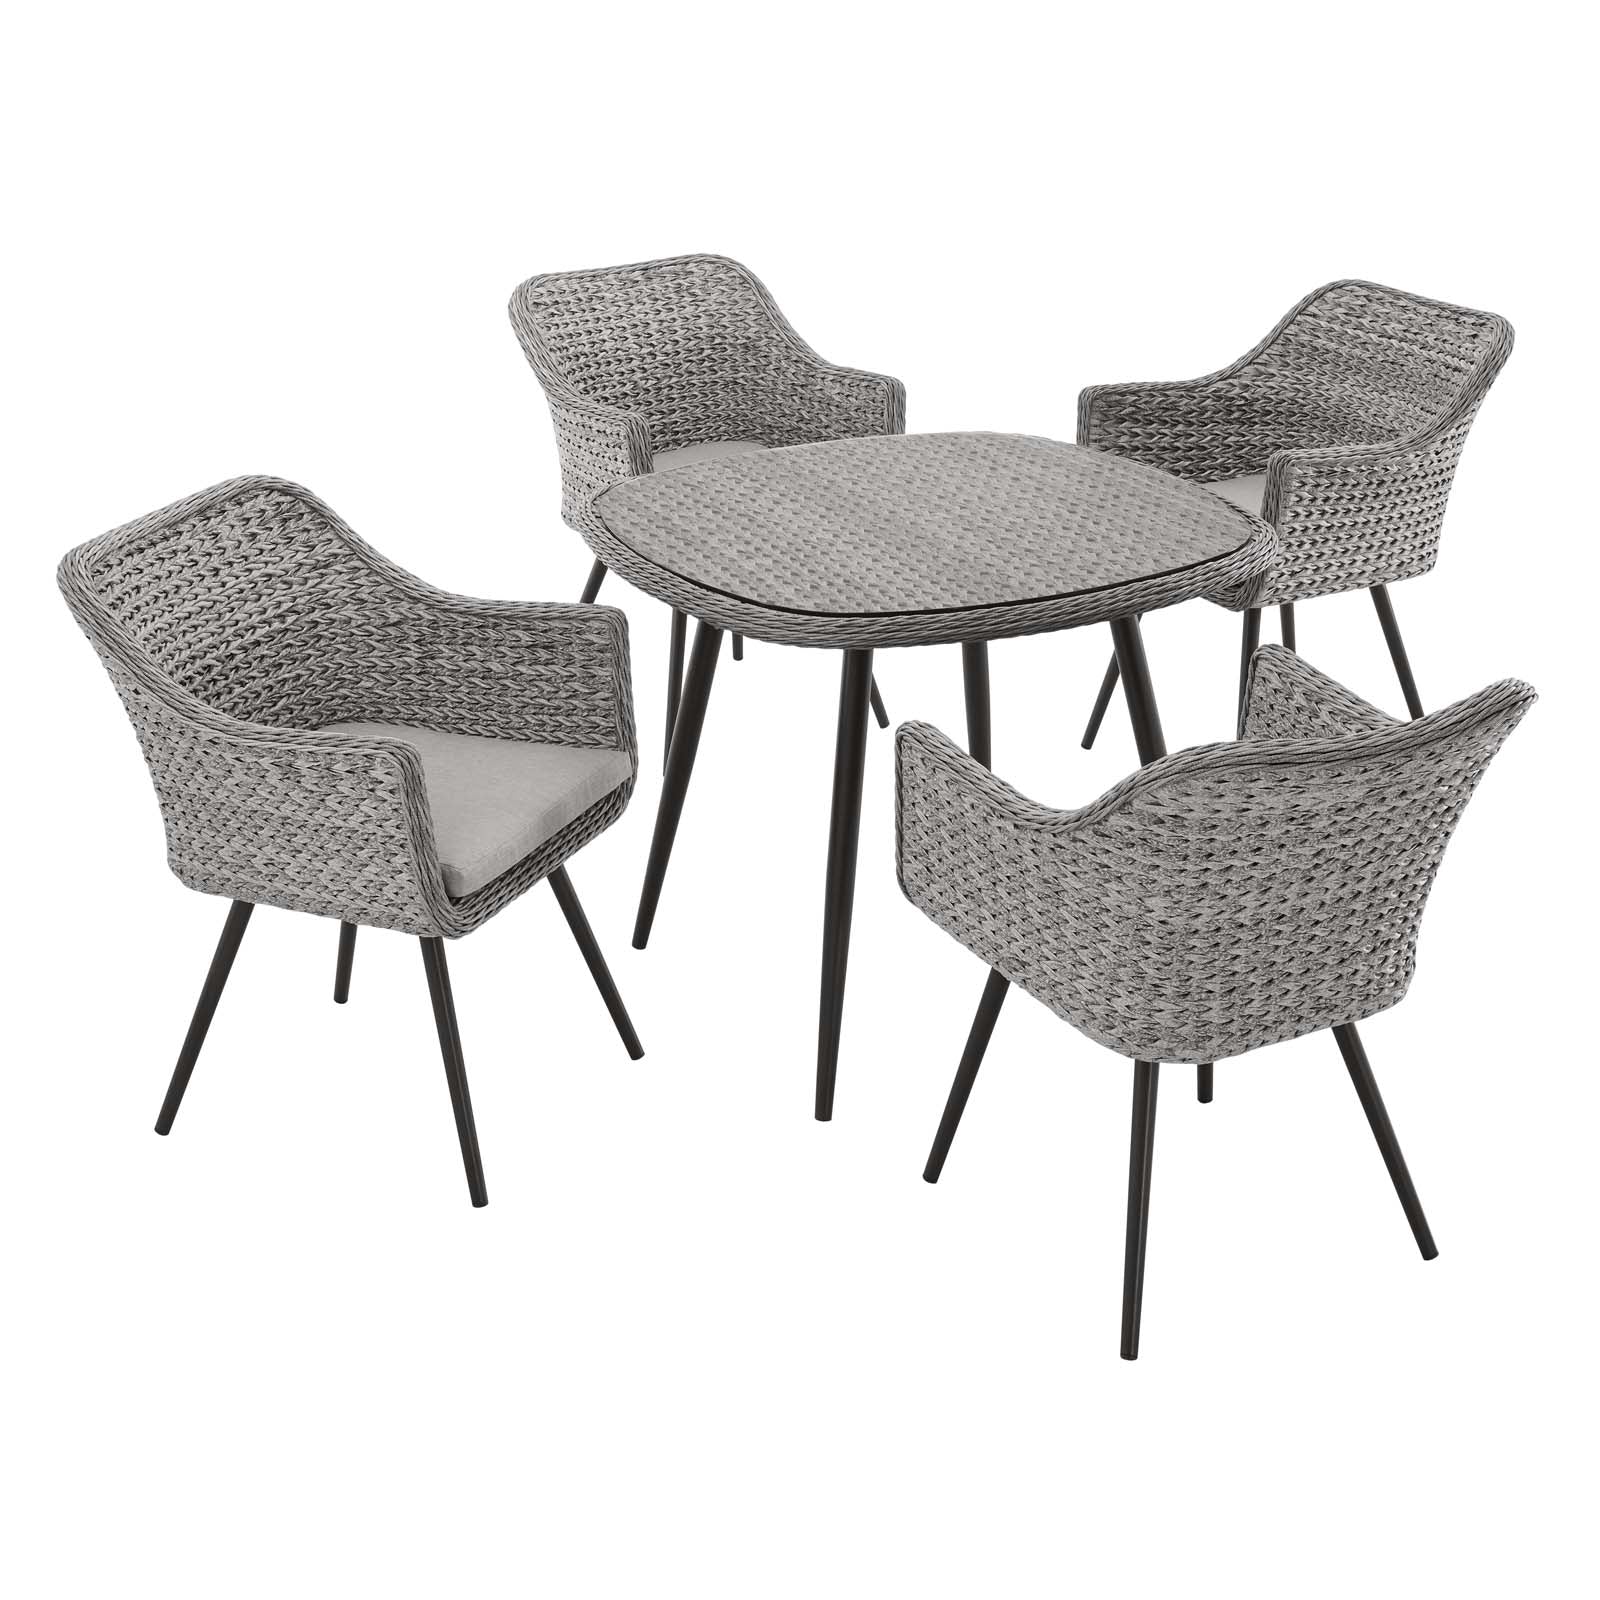 Endeavor 5 Piece Outdoor Patio Wicker Rattan Dining Set-Outdoor Dining Set-Modway-Wall2Wall Furnishings